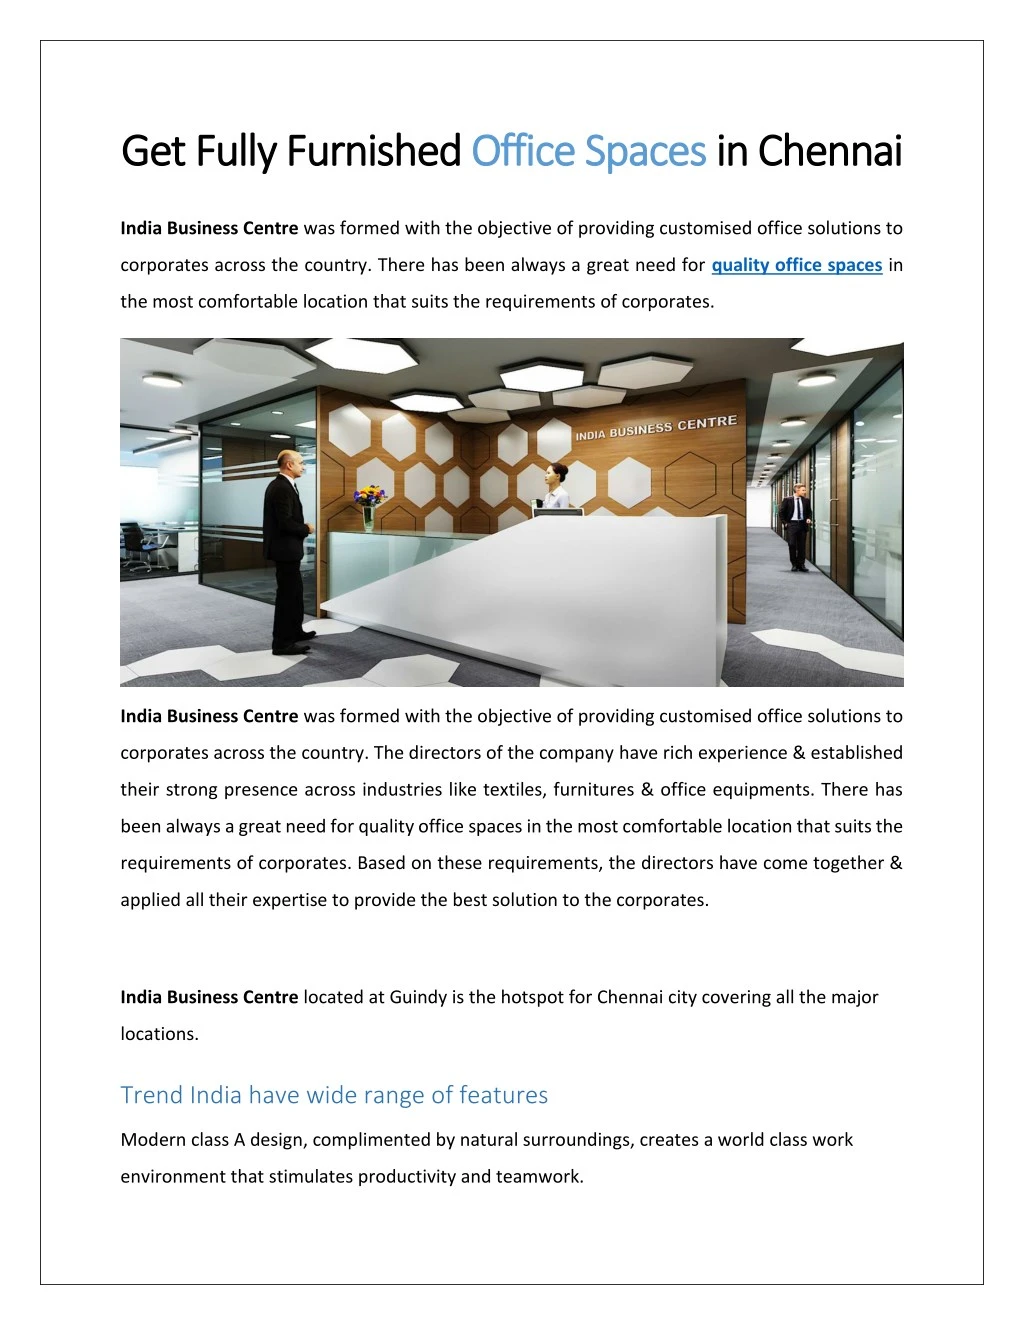 get fully furnished get fully furnished office